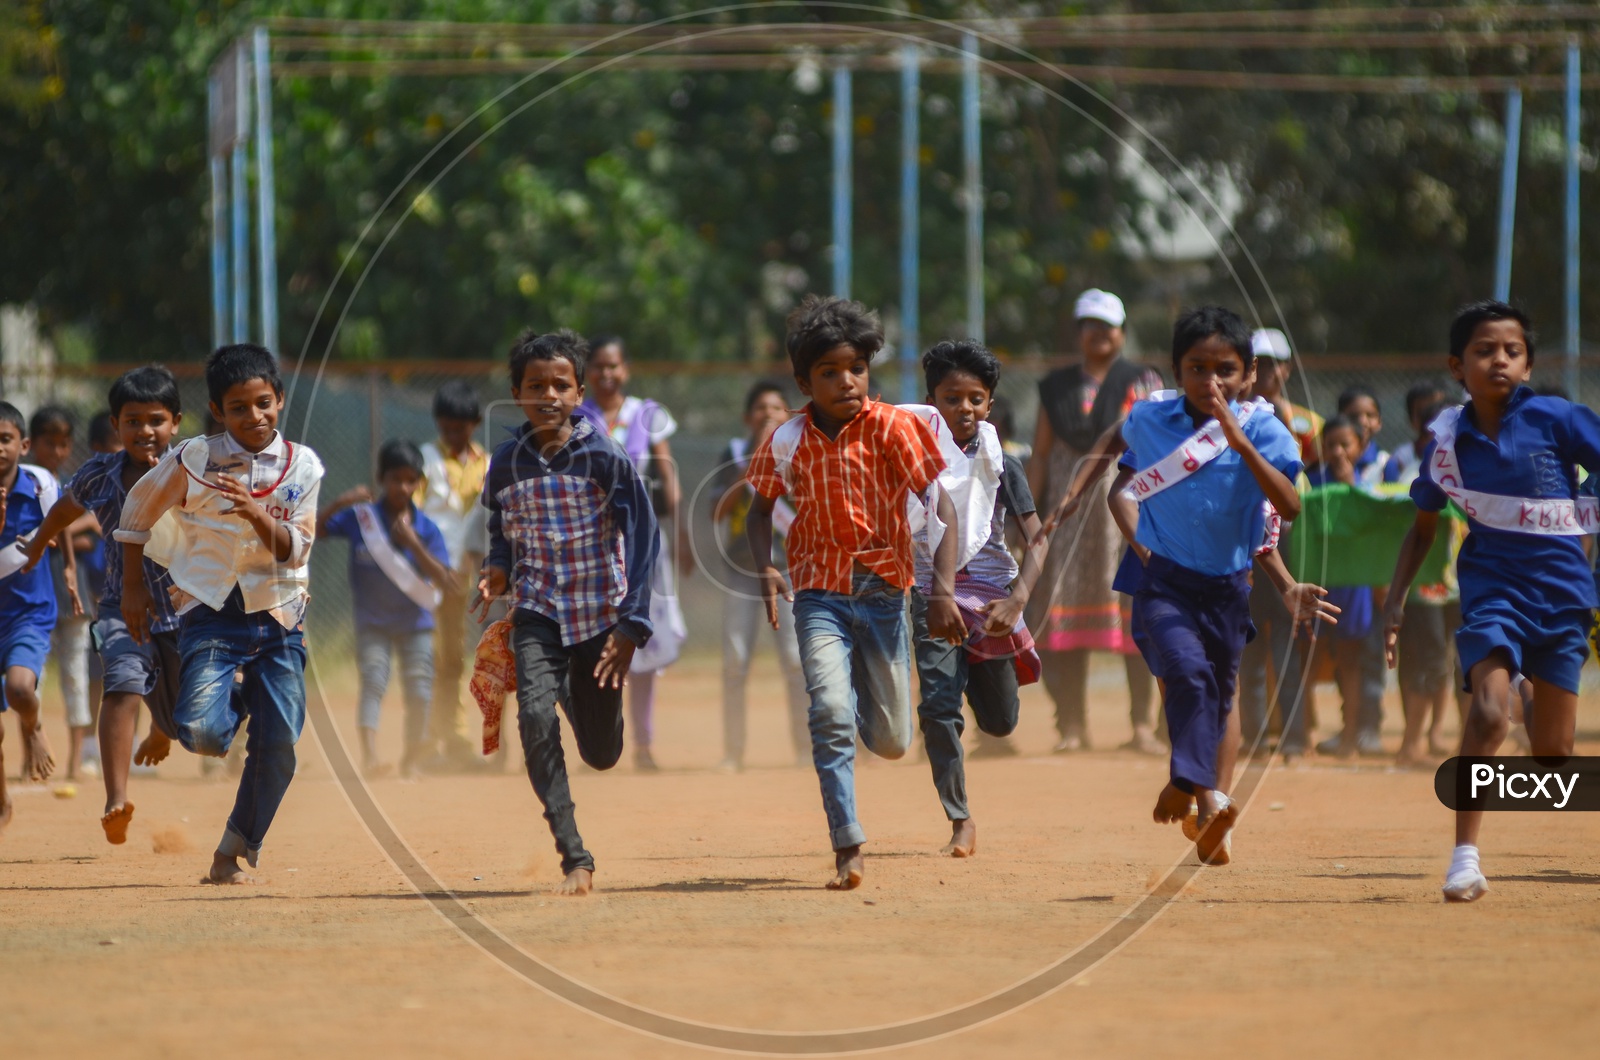 Children participate in games conducted during National Child Labour Project program